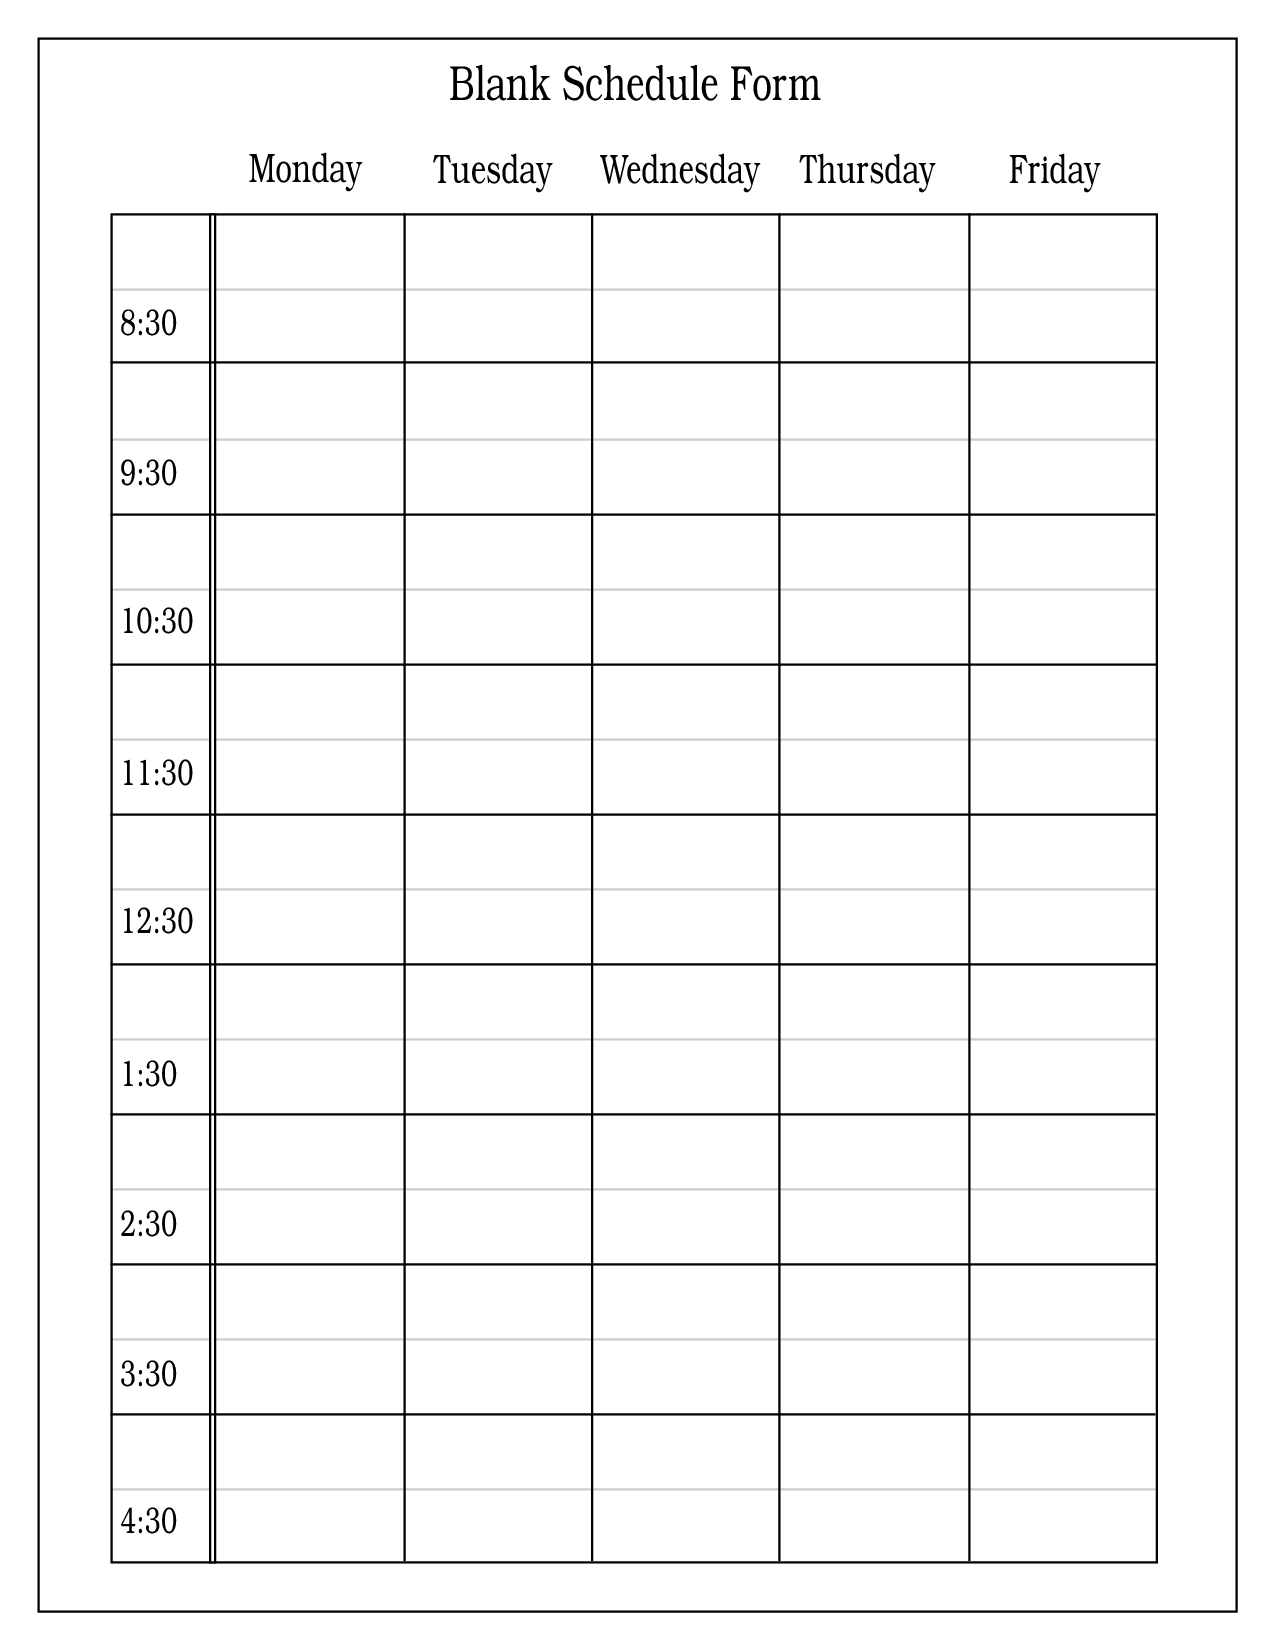 Blank Time Slot Week Schedules | Calendar Template Printable intended for Daily Calendar With Time Slots Template